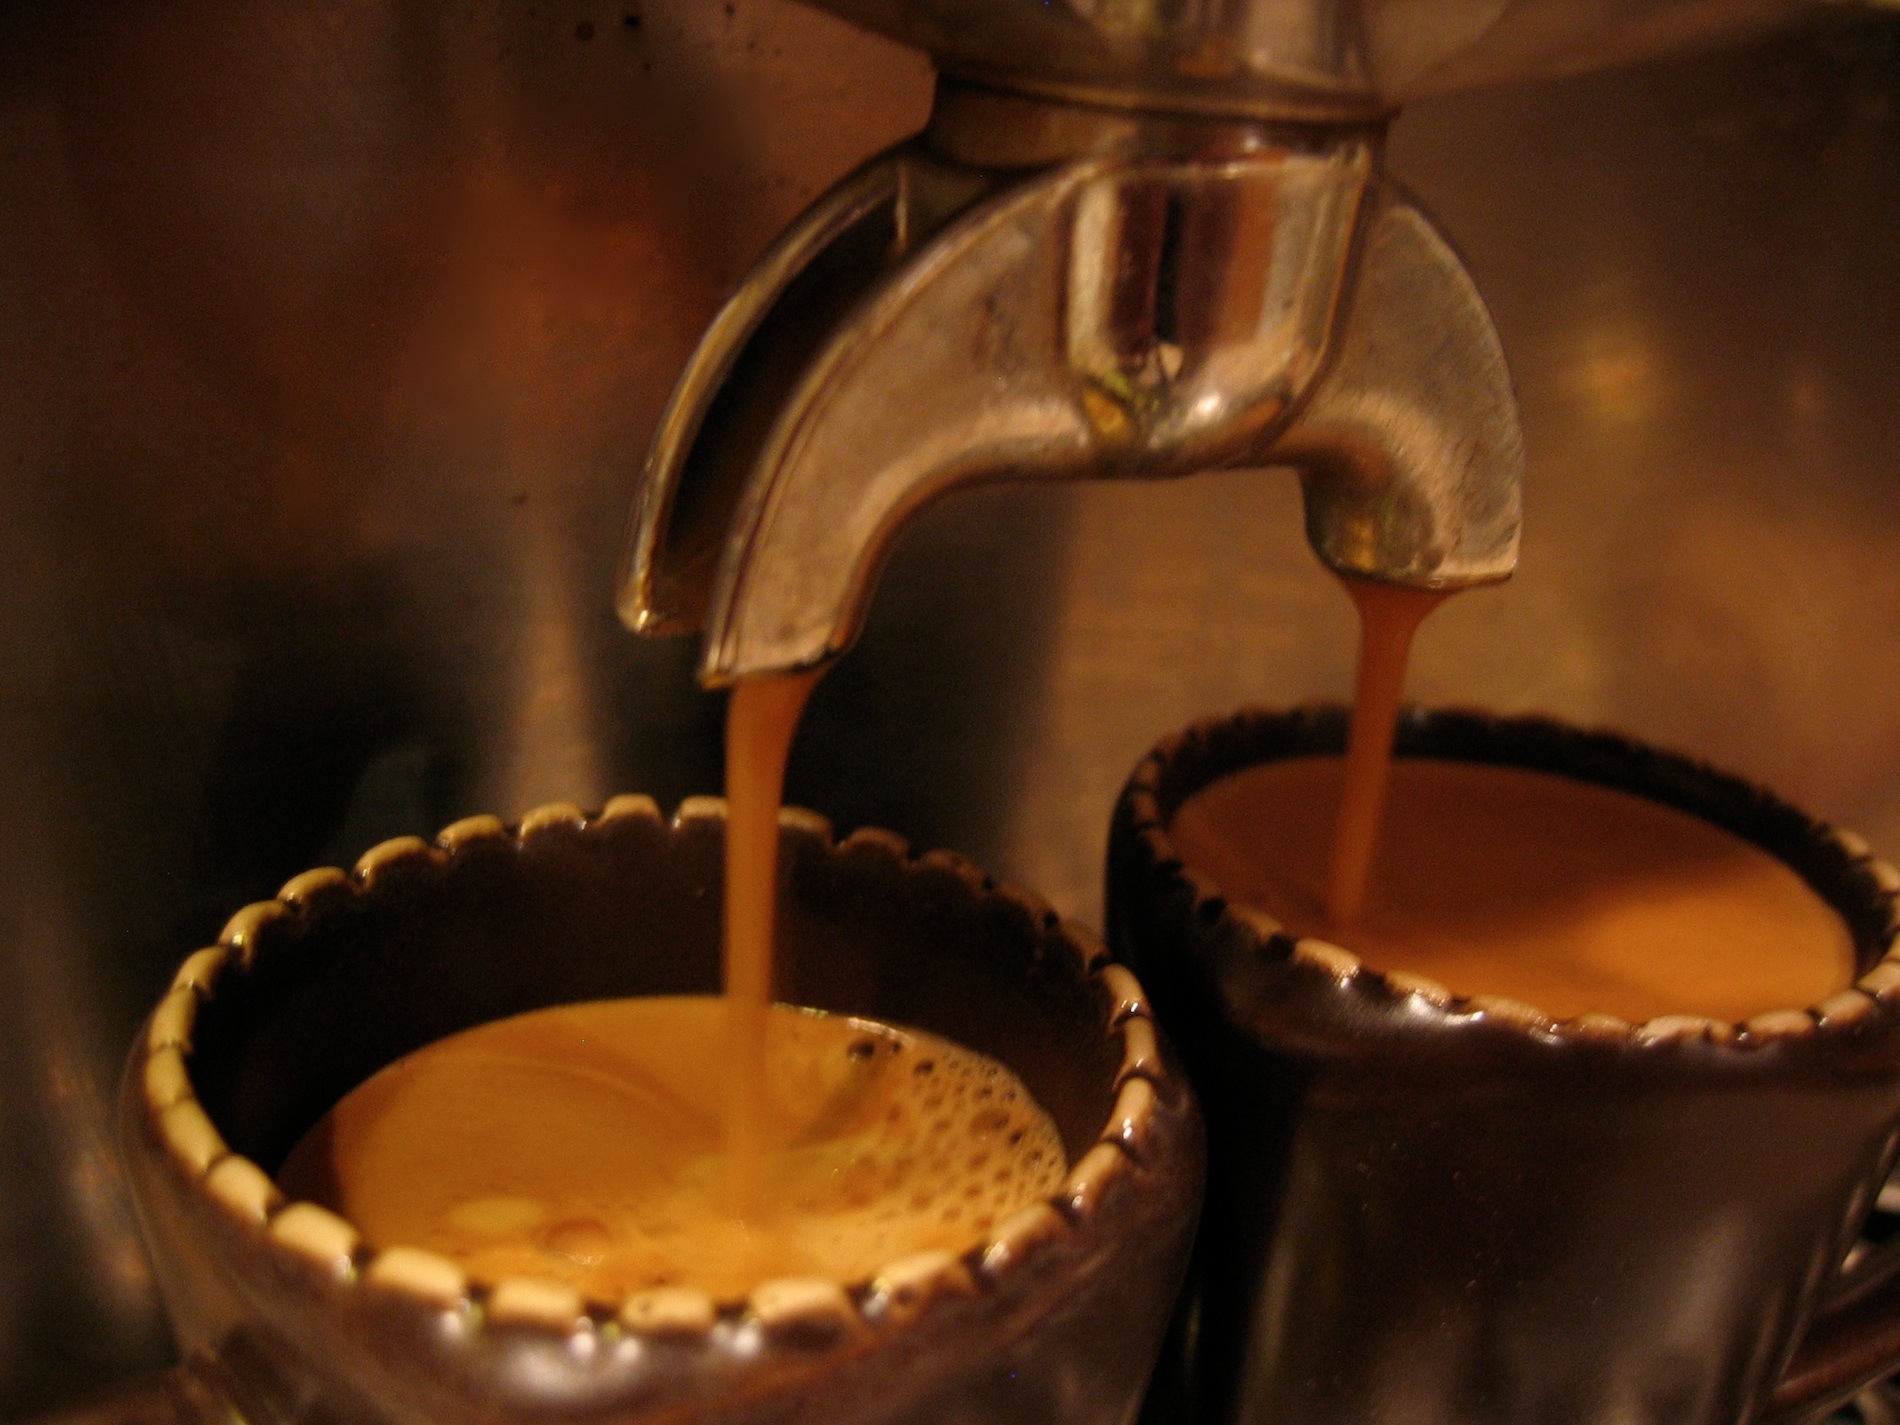 Espresso a lungo, or the long pull, is thinner in texture, more acidic, and contains more caffeine than a ristretto pull